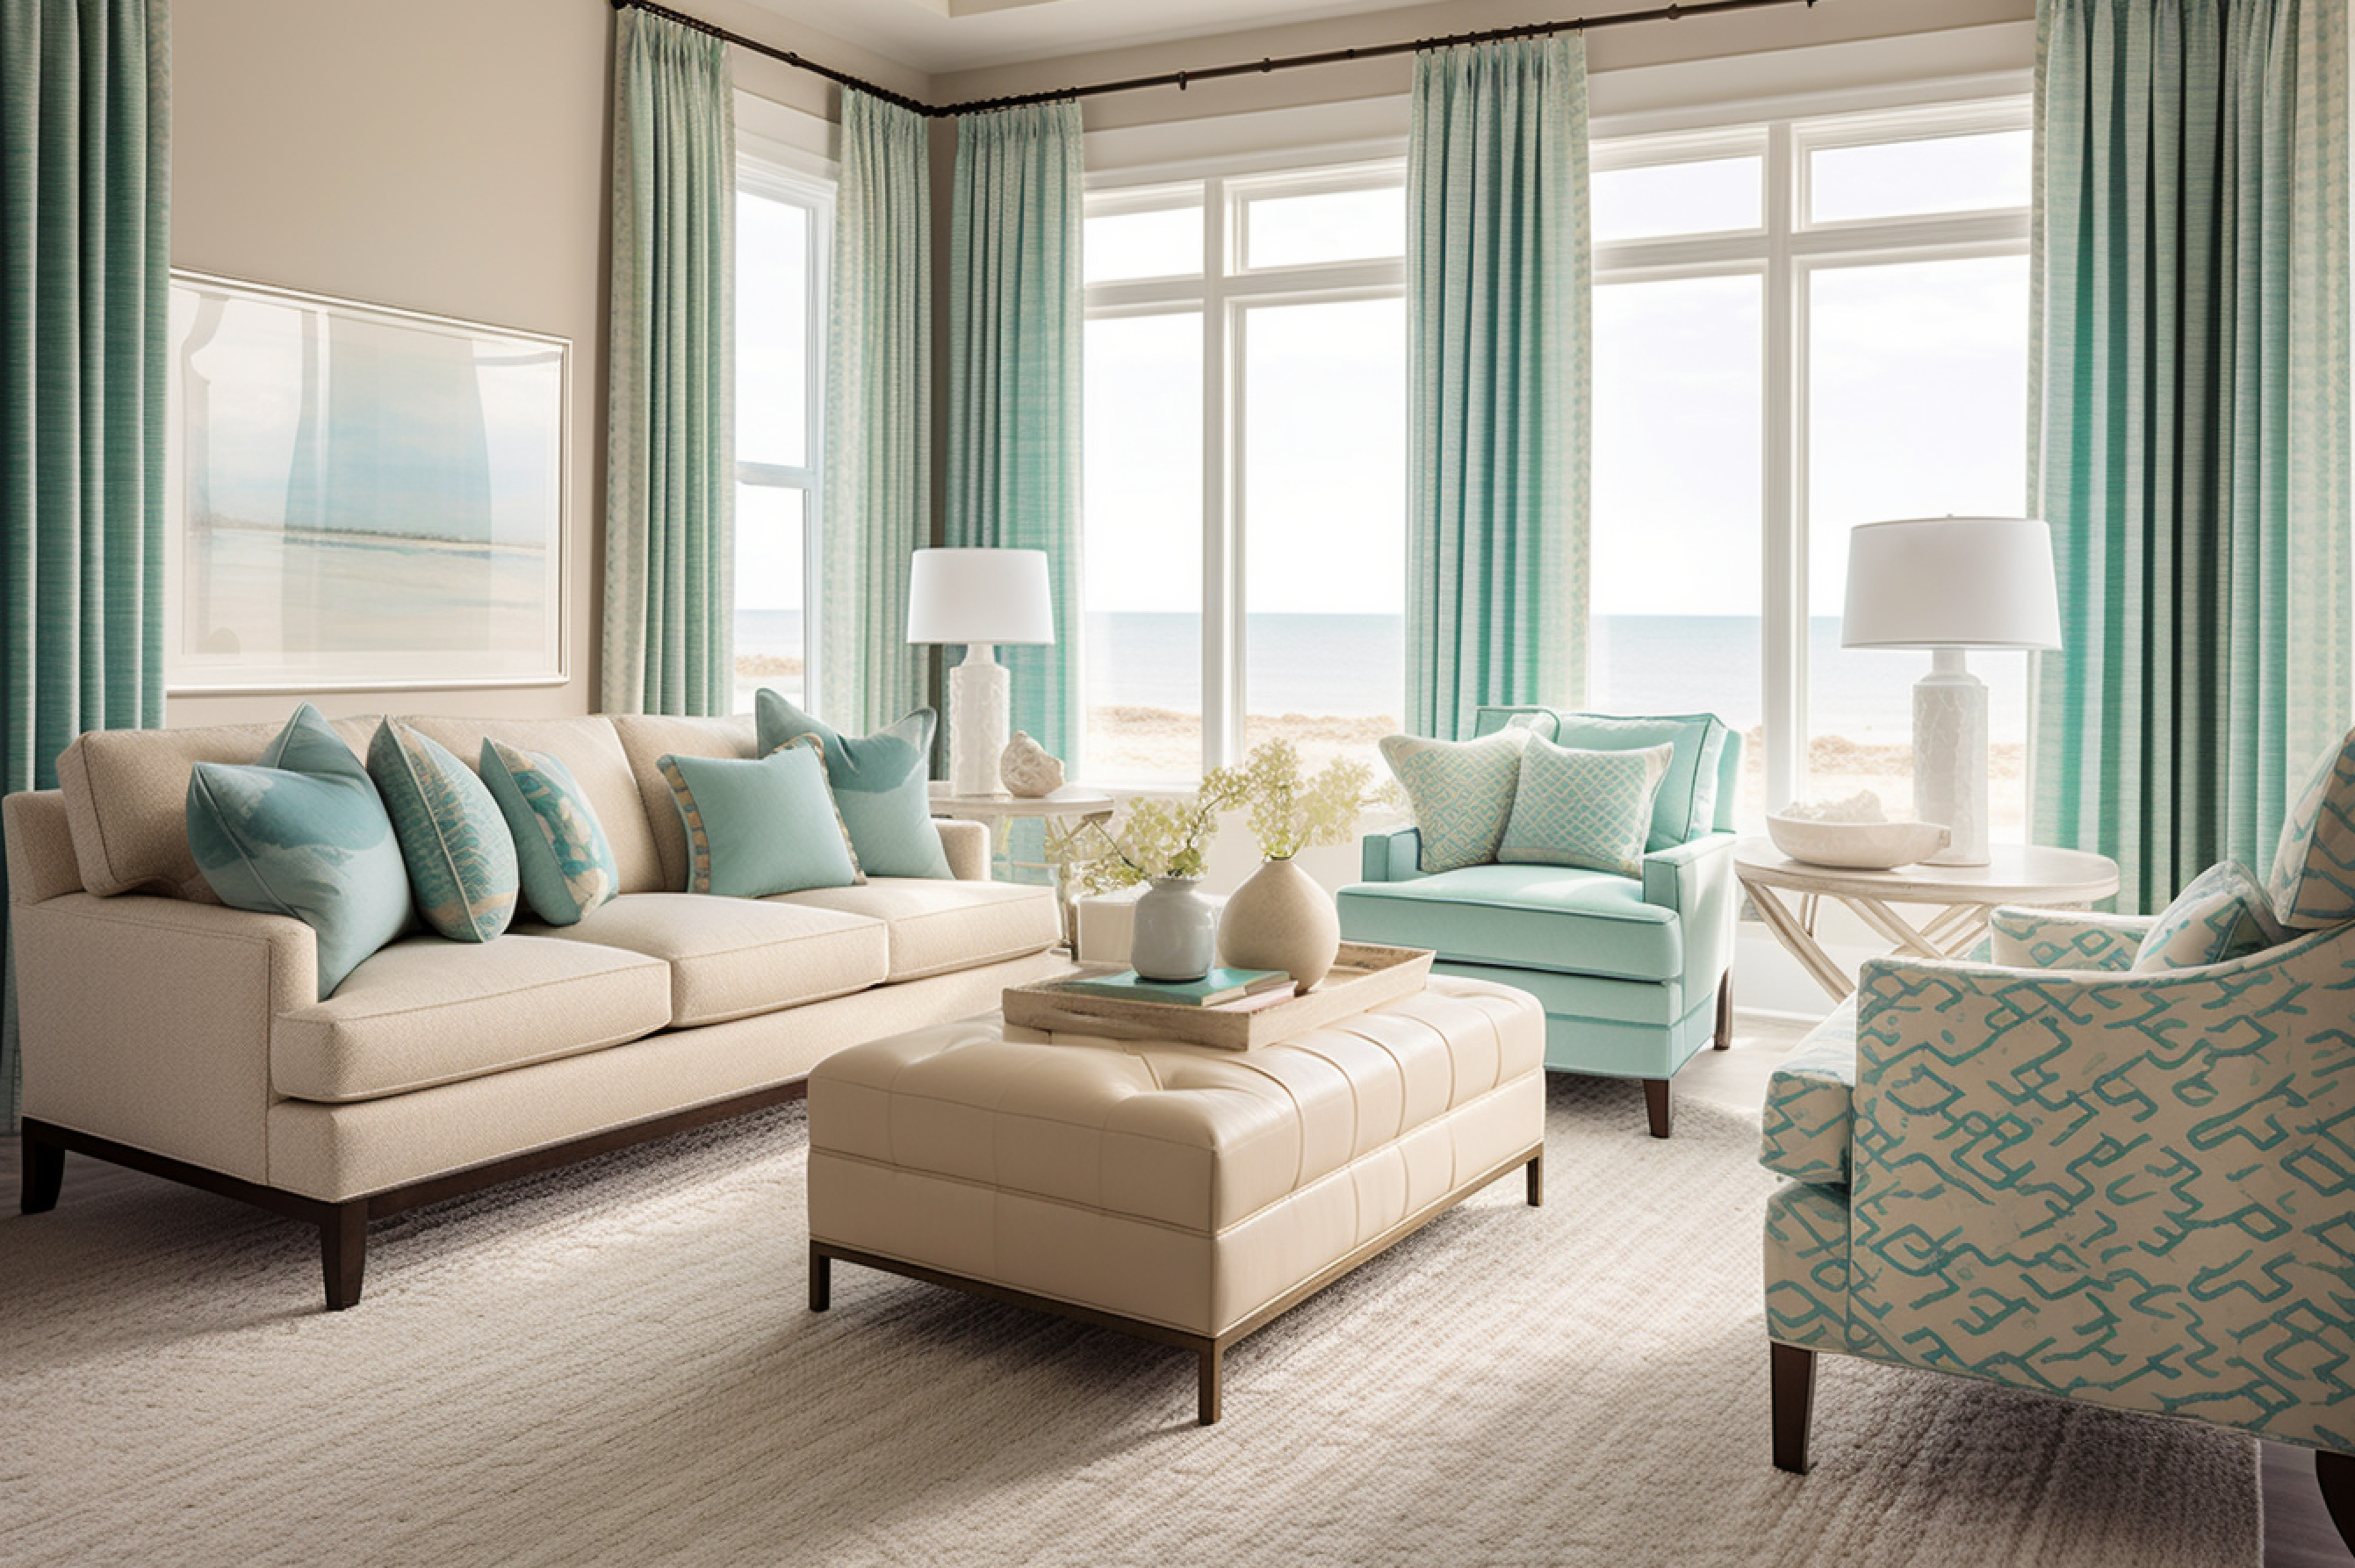 Photo of a beach-inspired living room with light beige furniture and turquoise accents in cushions and rugs.